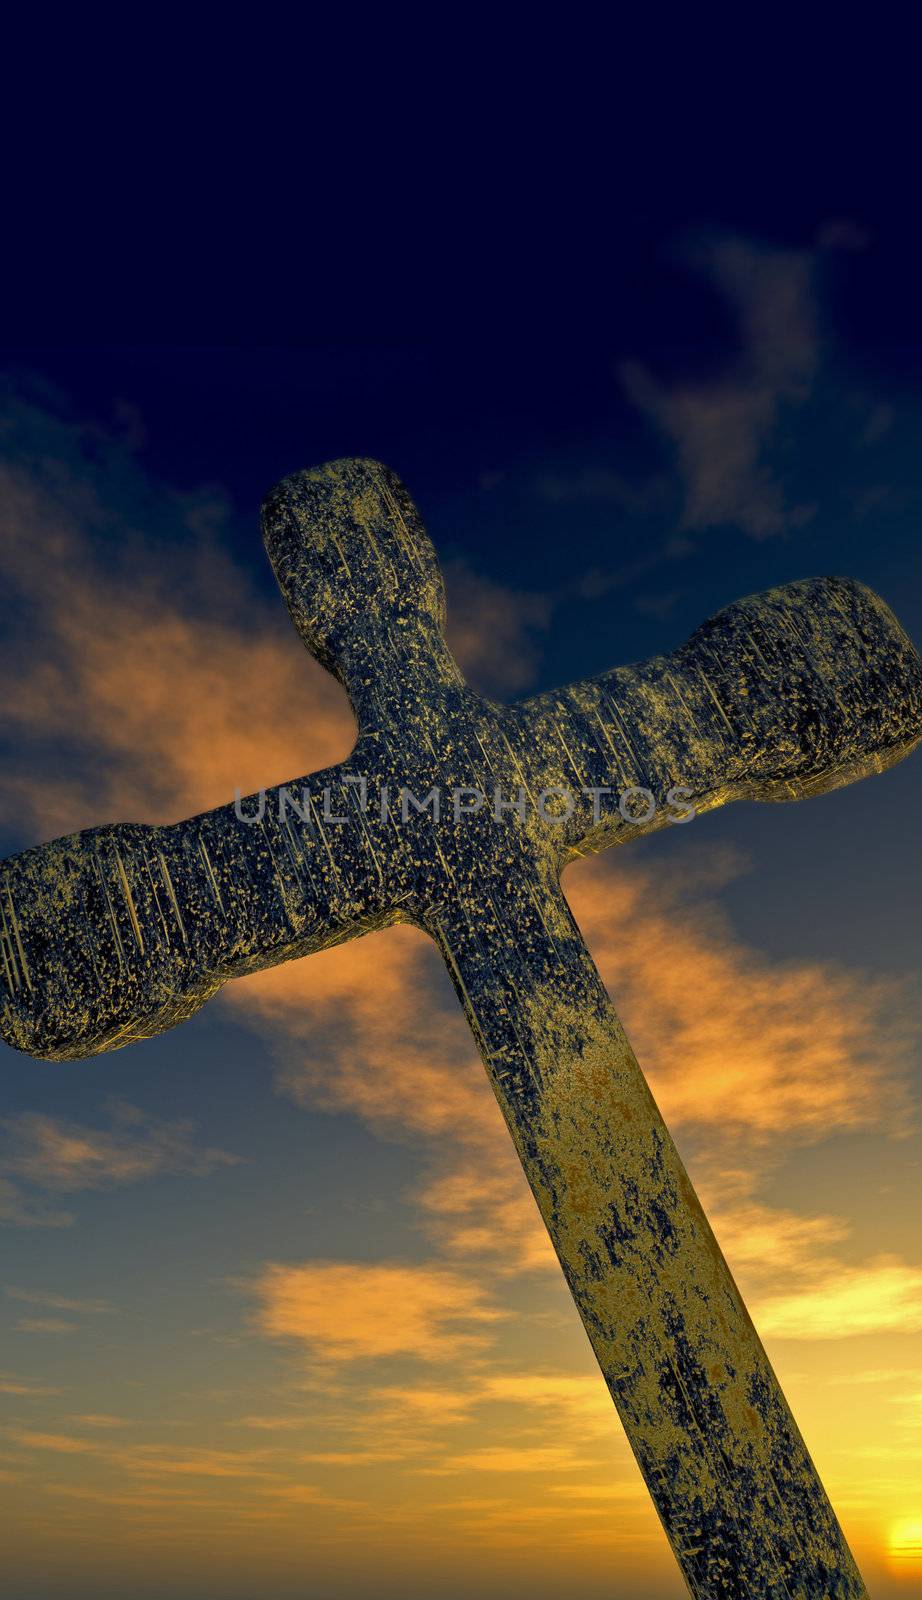 Cross at sunset by Geoarts